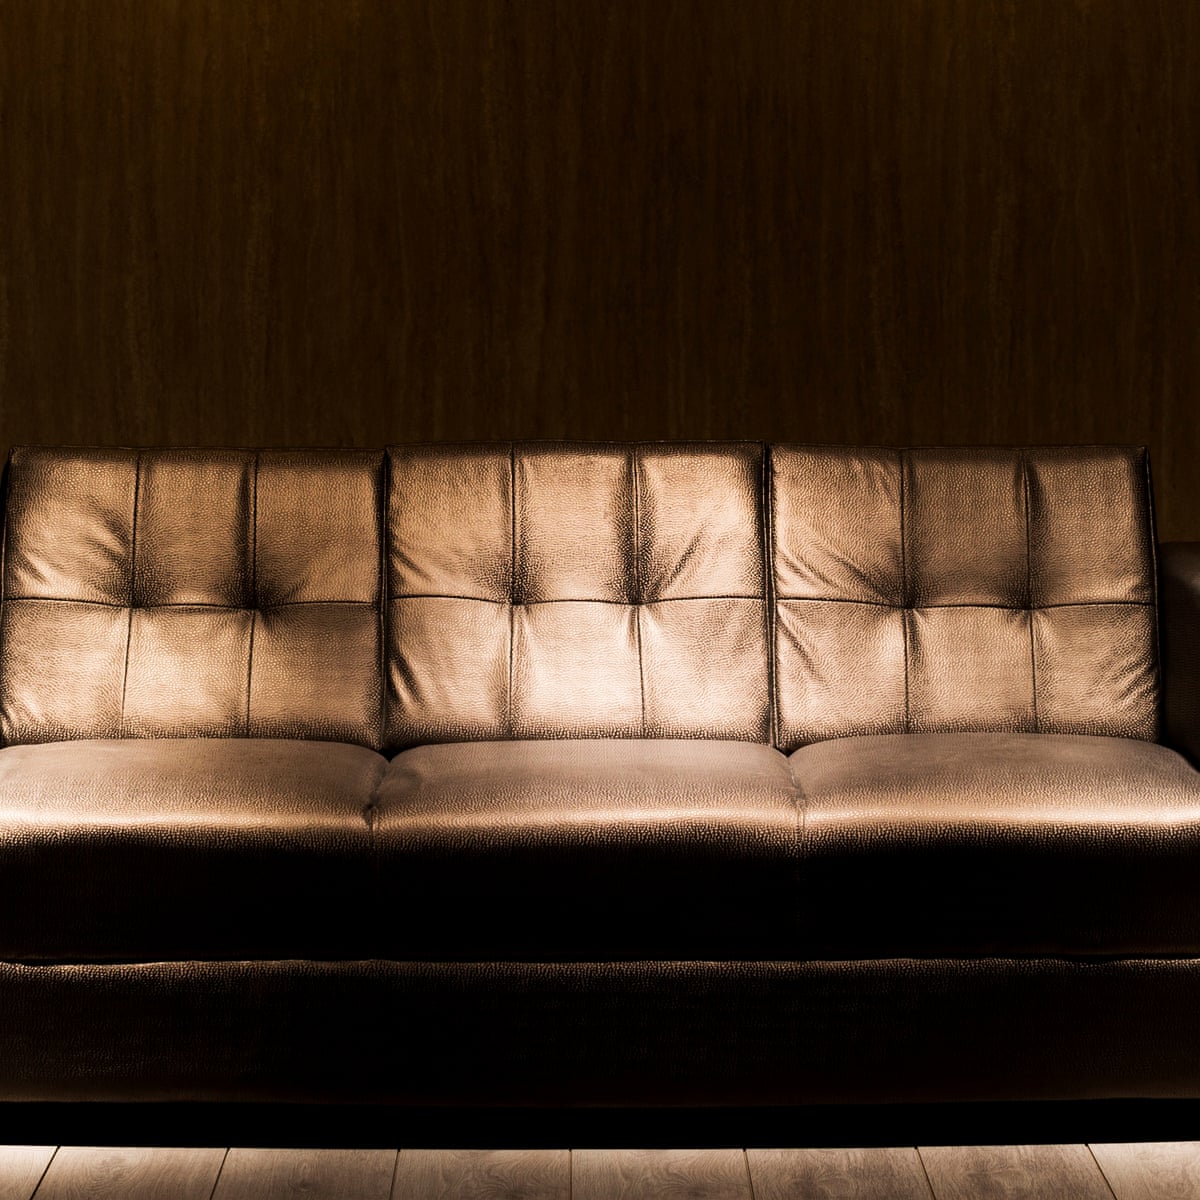 Male casting couch